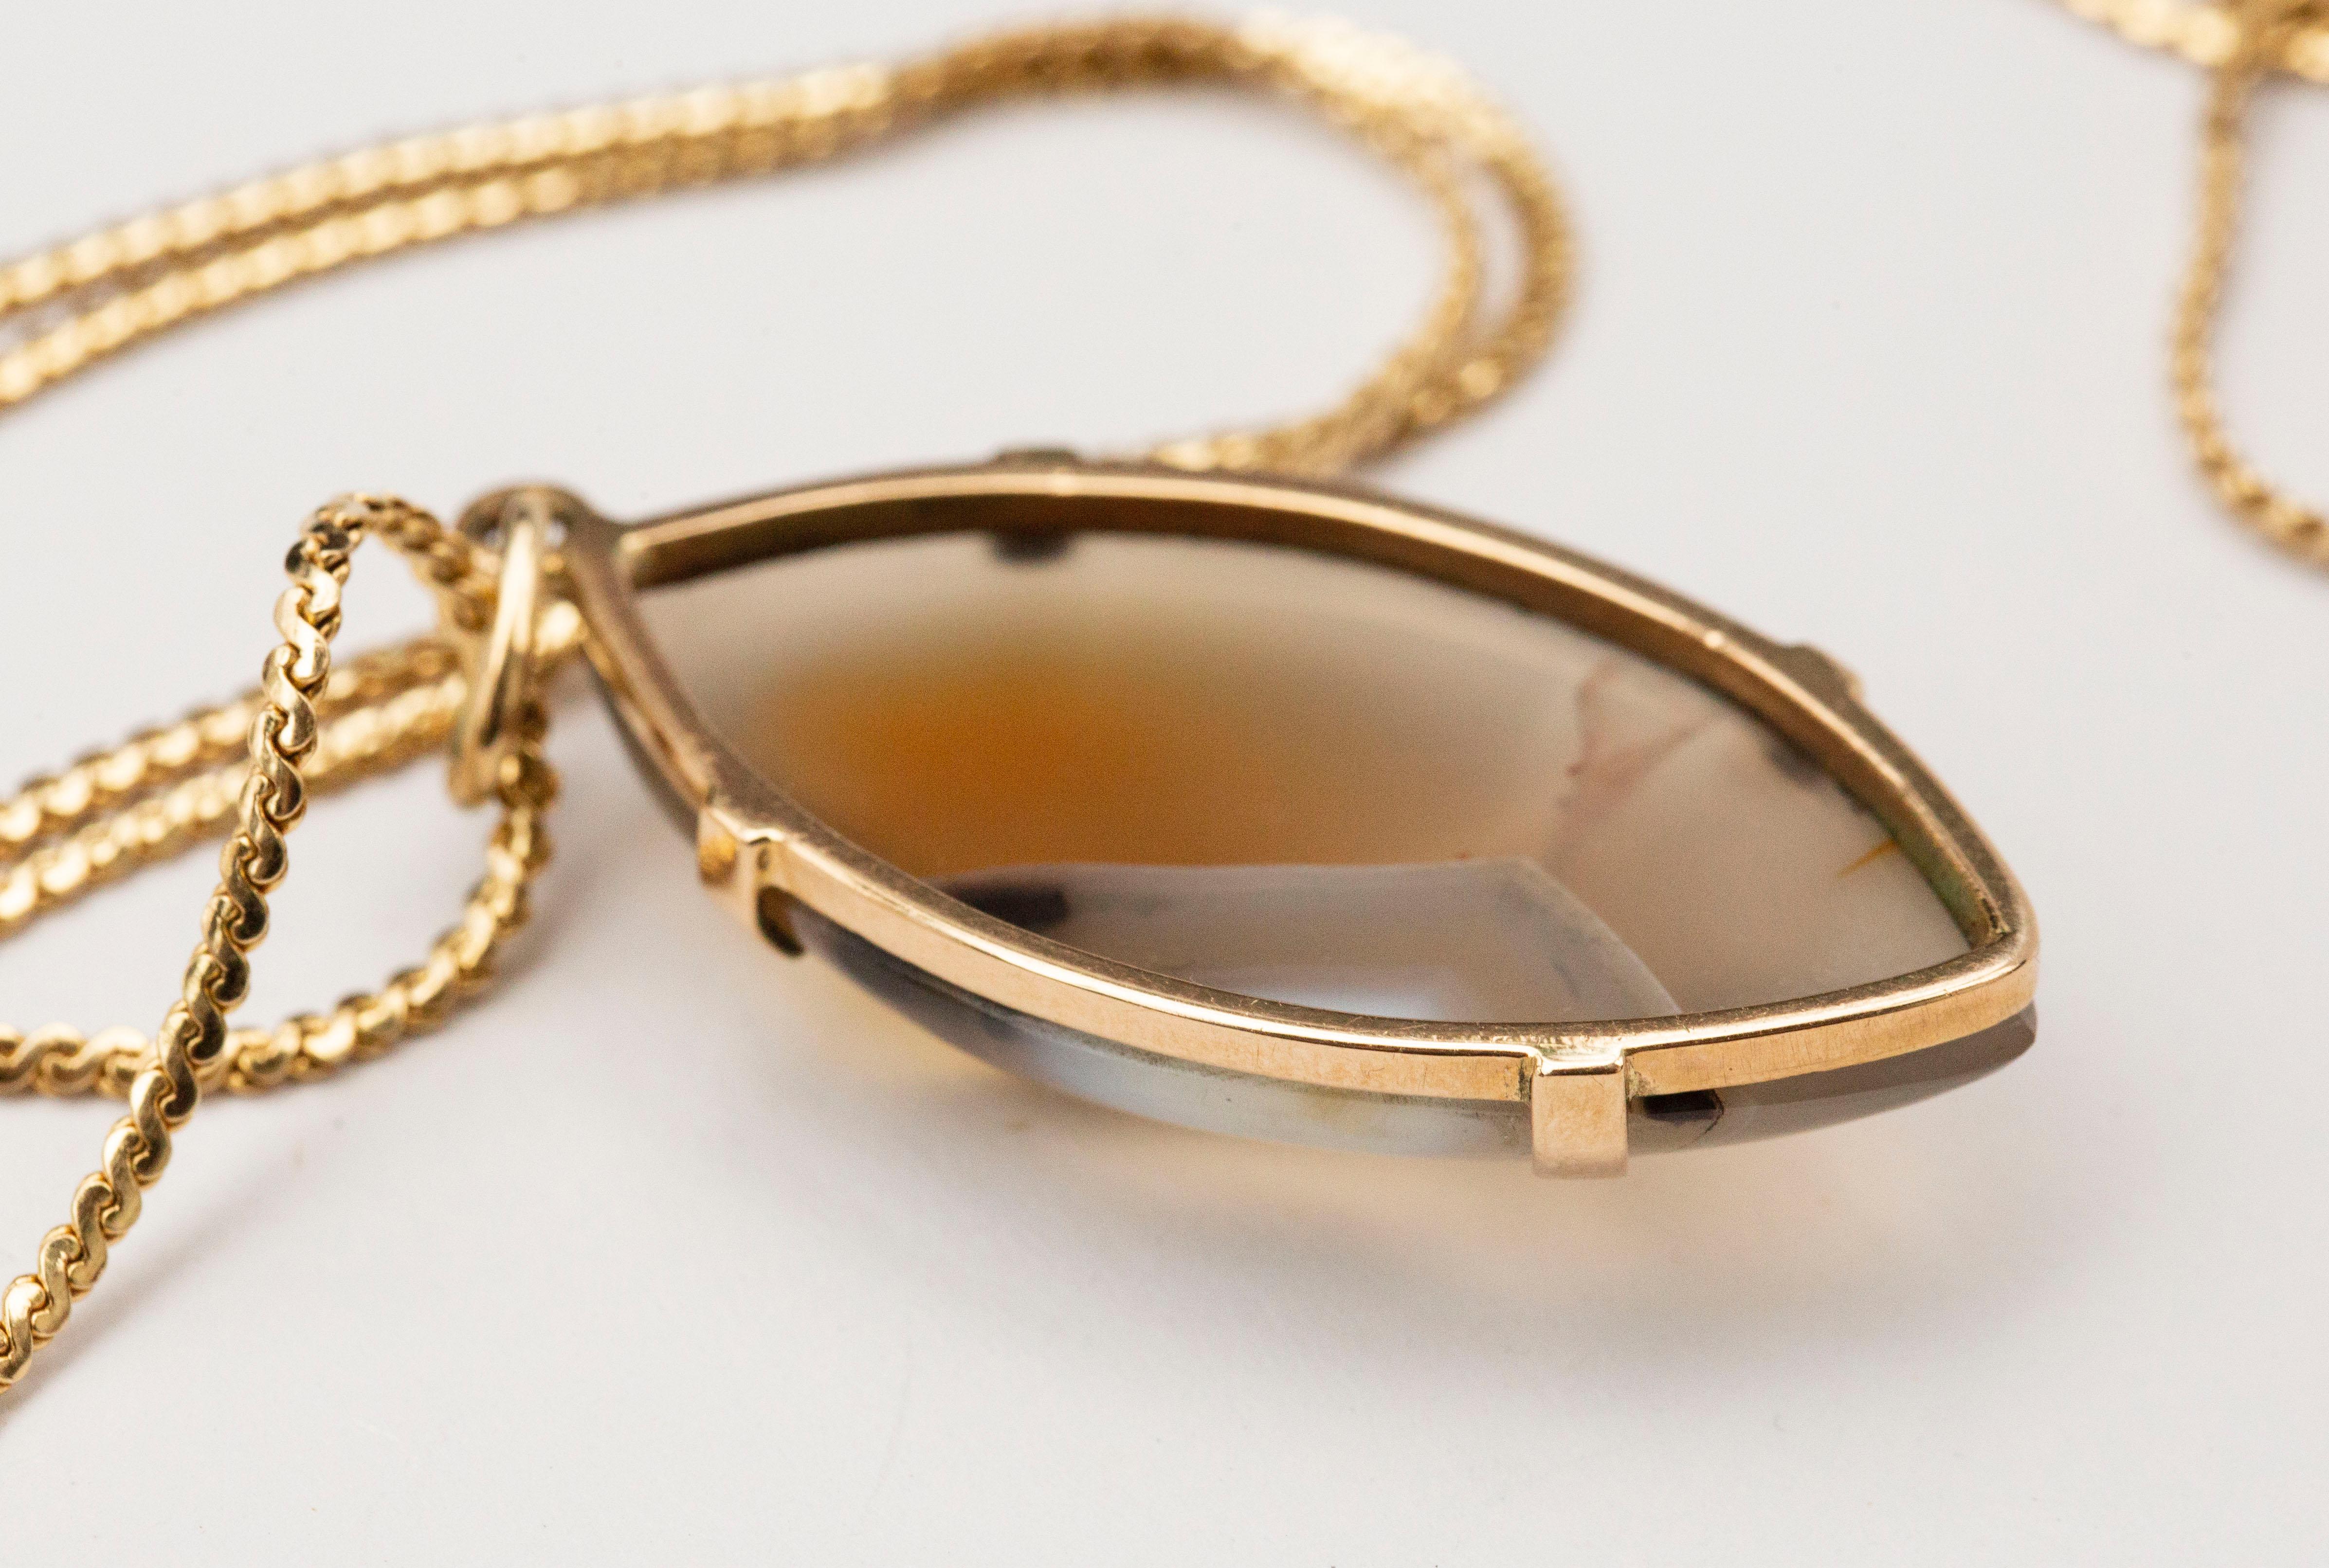 Women's or Men's 14 Karat Gold Necklace Chain with an Agate Pendant in 14 Karat Gold Setting For Sale